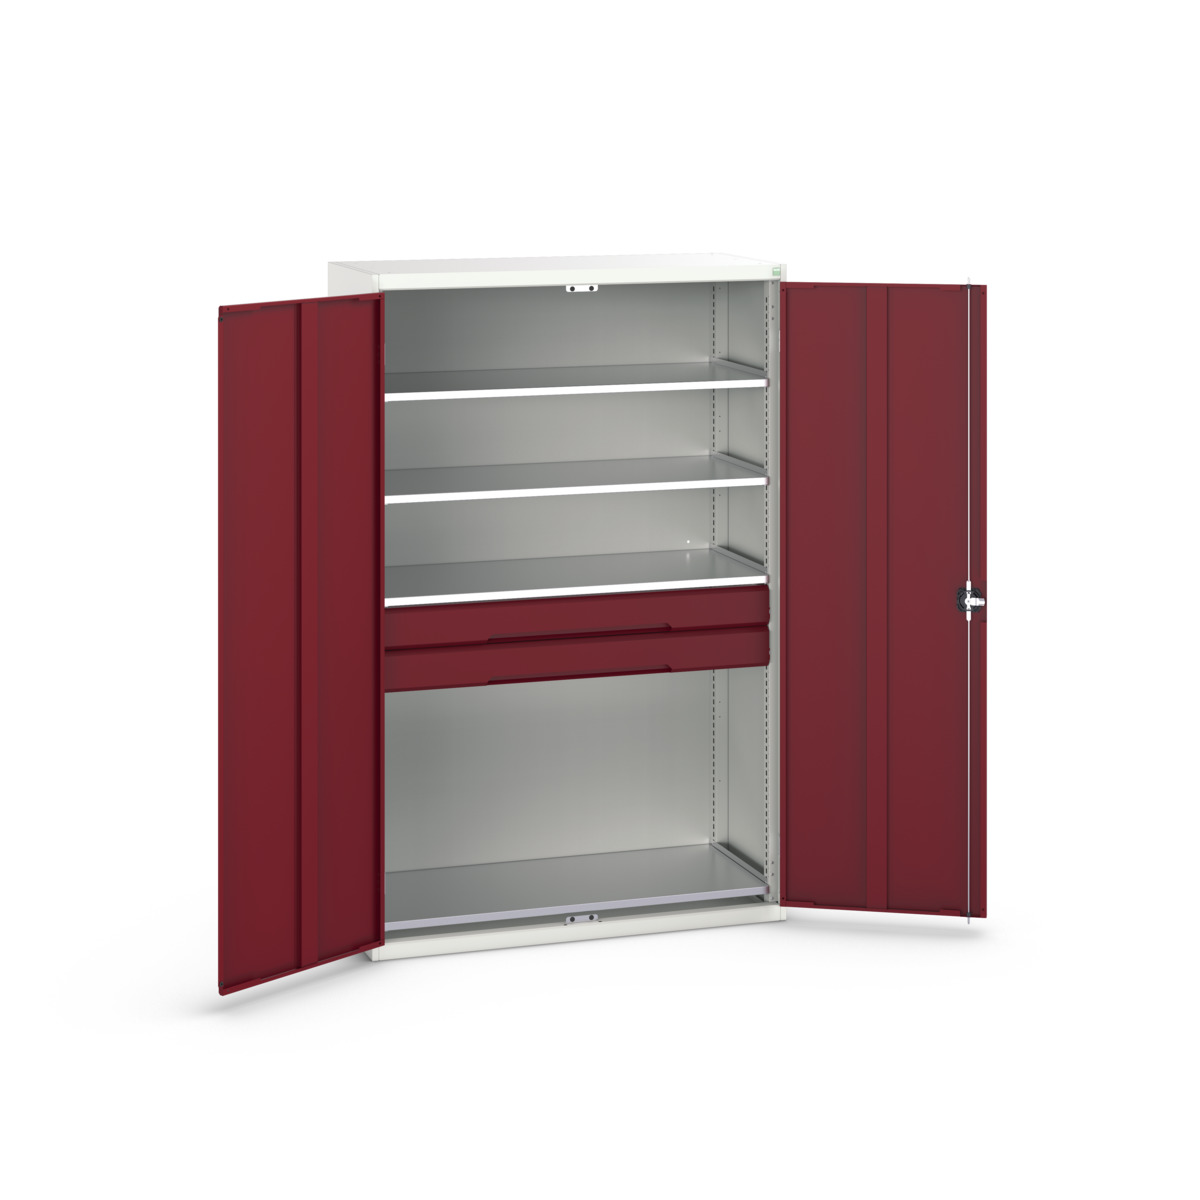 16926654.24 - verso kitted cupboard